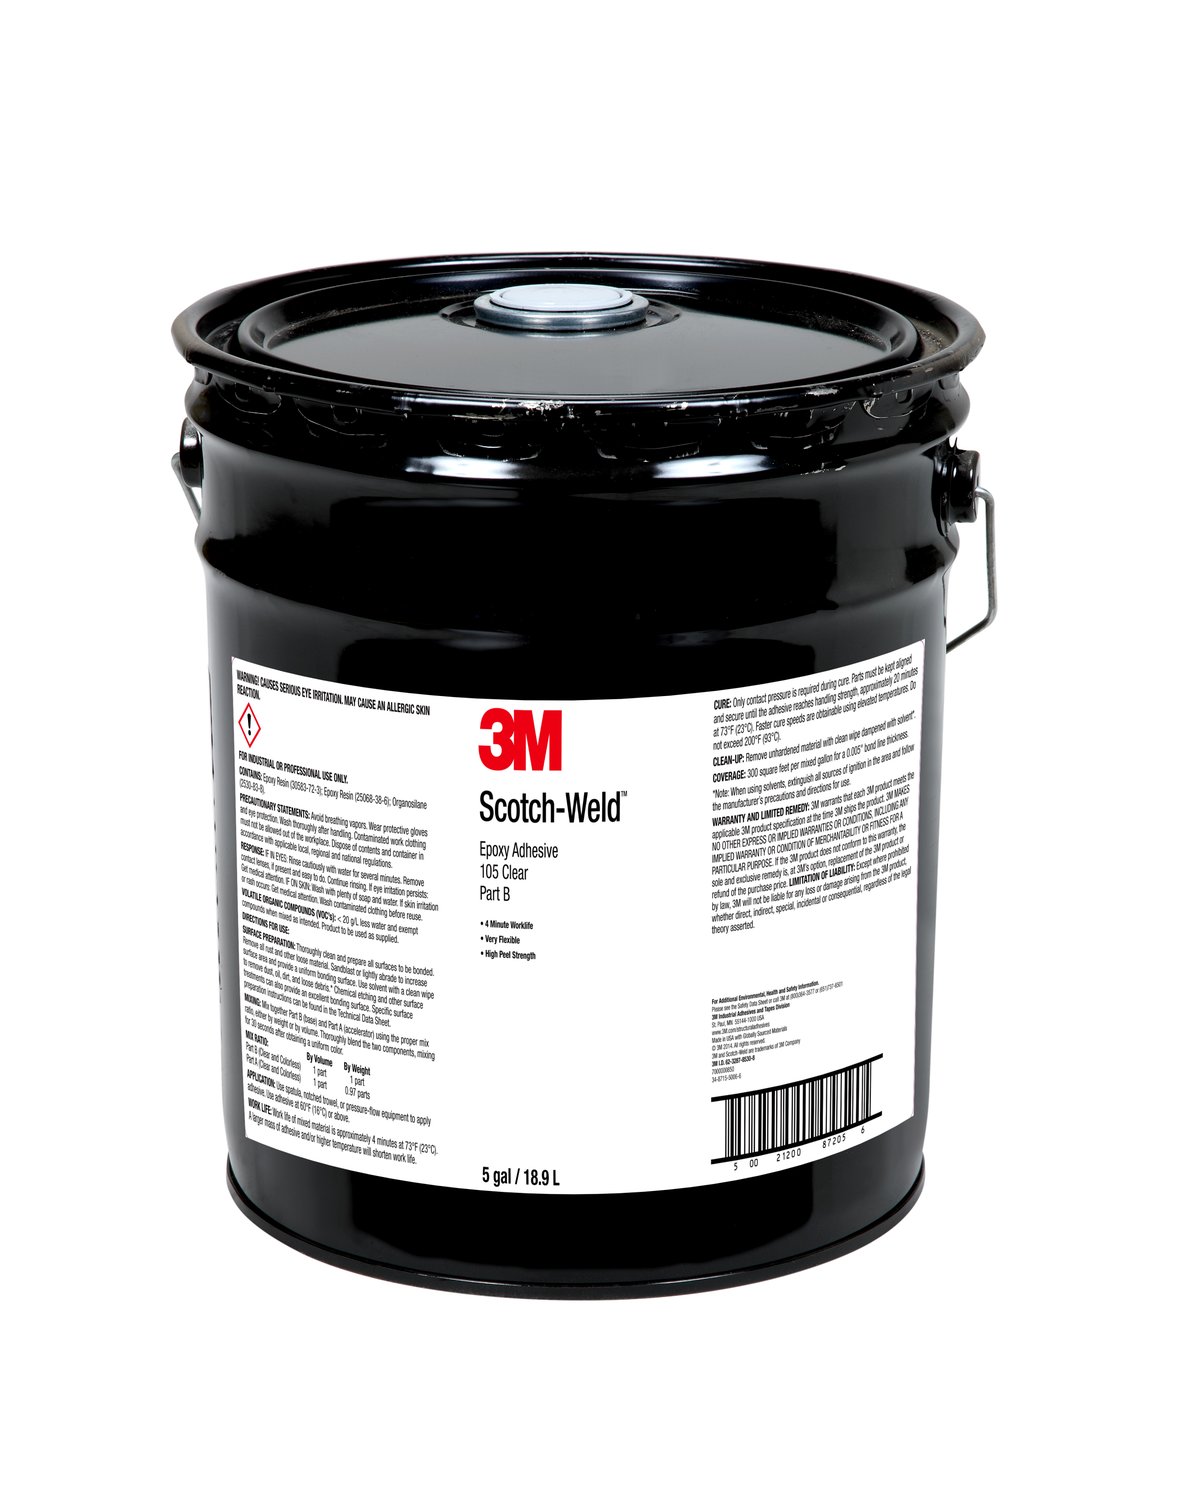 00021200872051, 3M Scotch-Weld Epoxy Adhesive 105, Clear, Part B, 5 Gallon  (Pail), Drum, Aircraft products, two-part-structural-adhesives